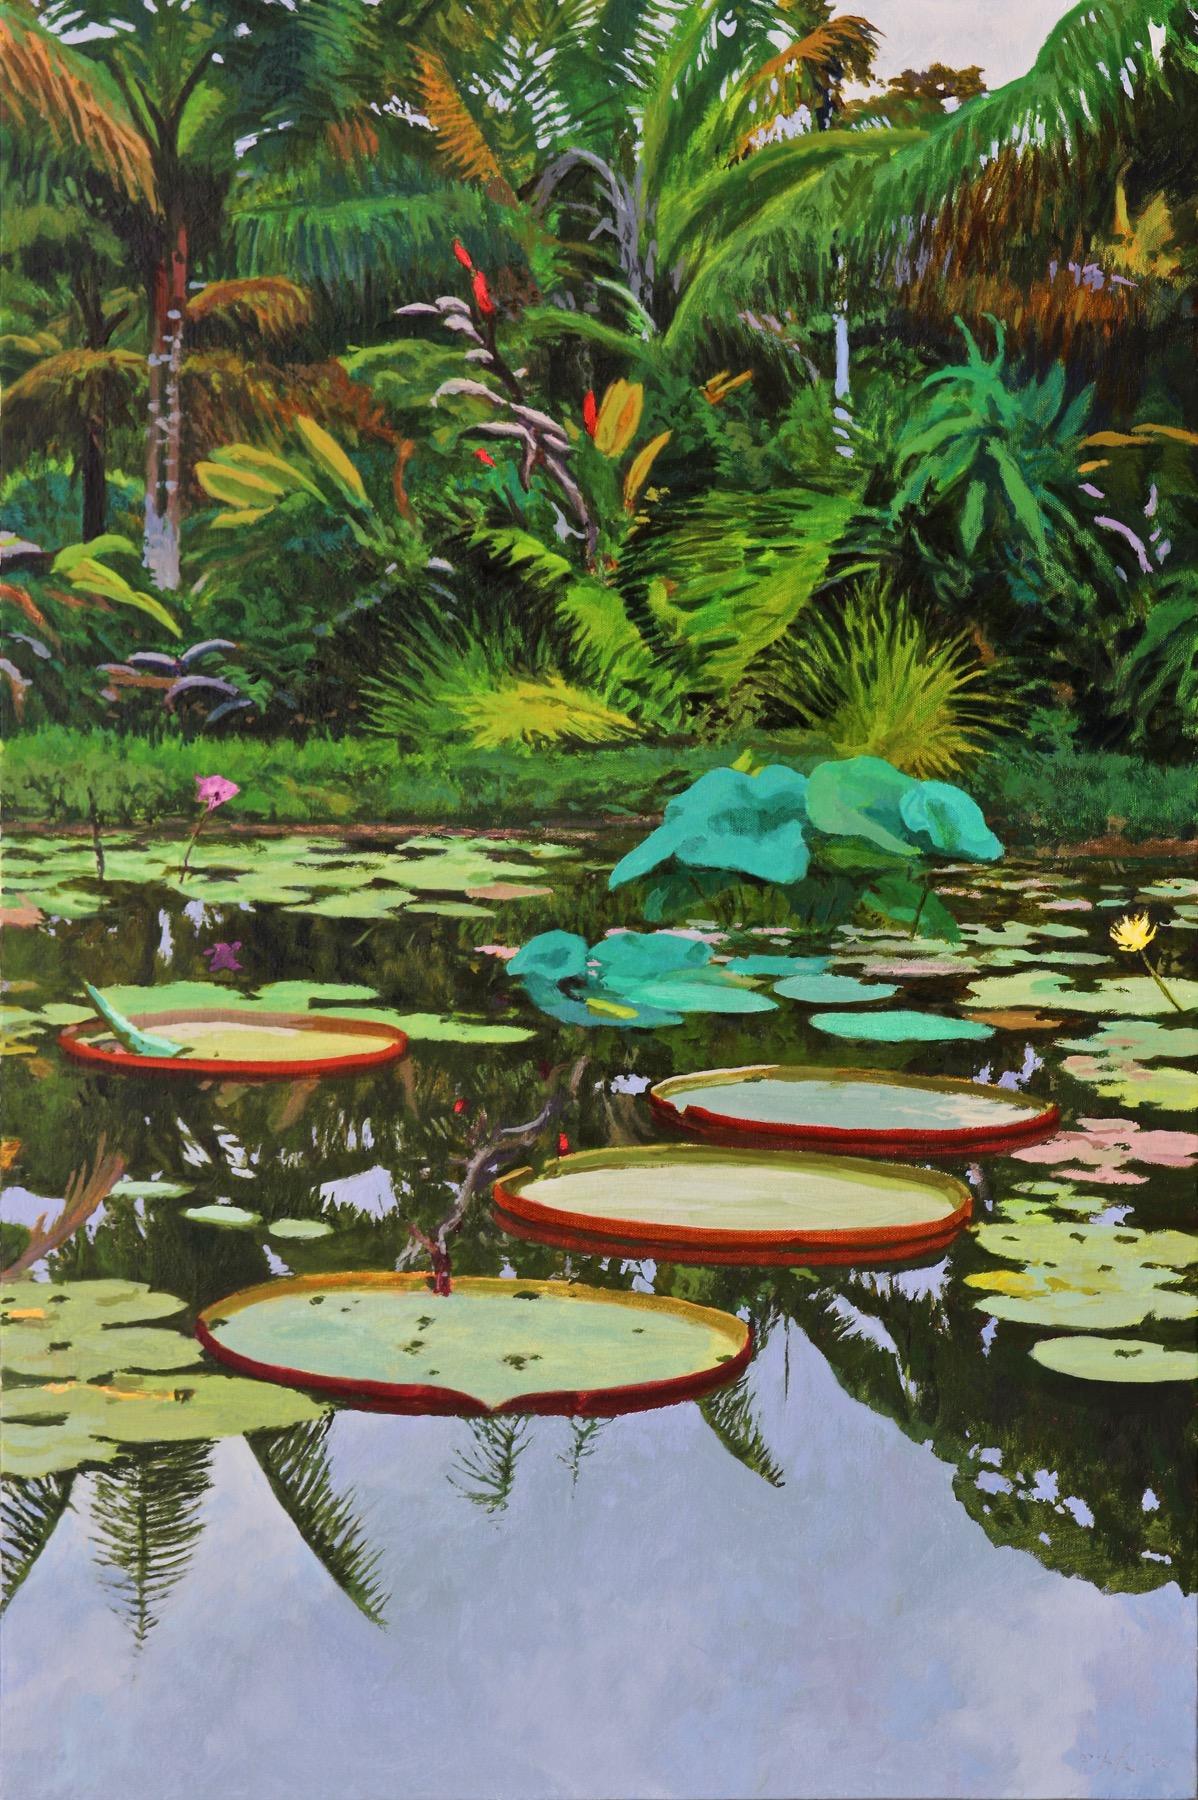 Peter Loftus Still-Life Painting - Lily Pond at Pana'ewa / oil on canvas painting - 36 x 24 inches